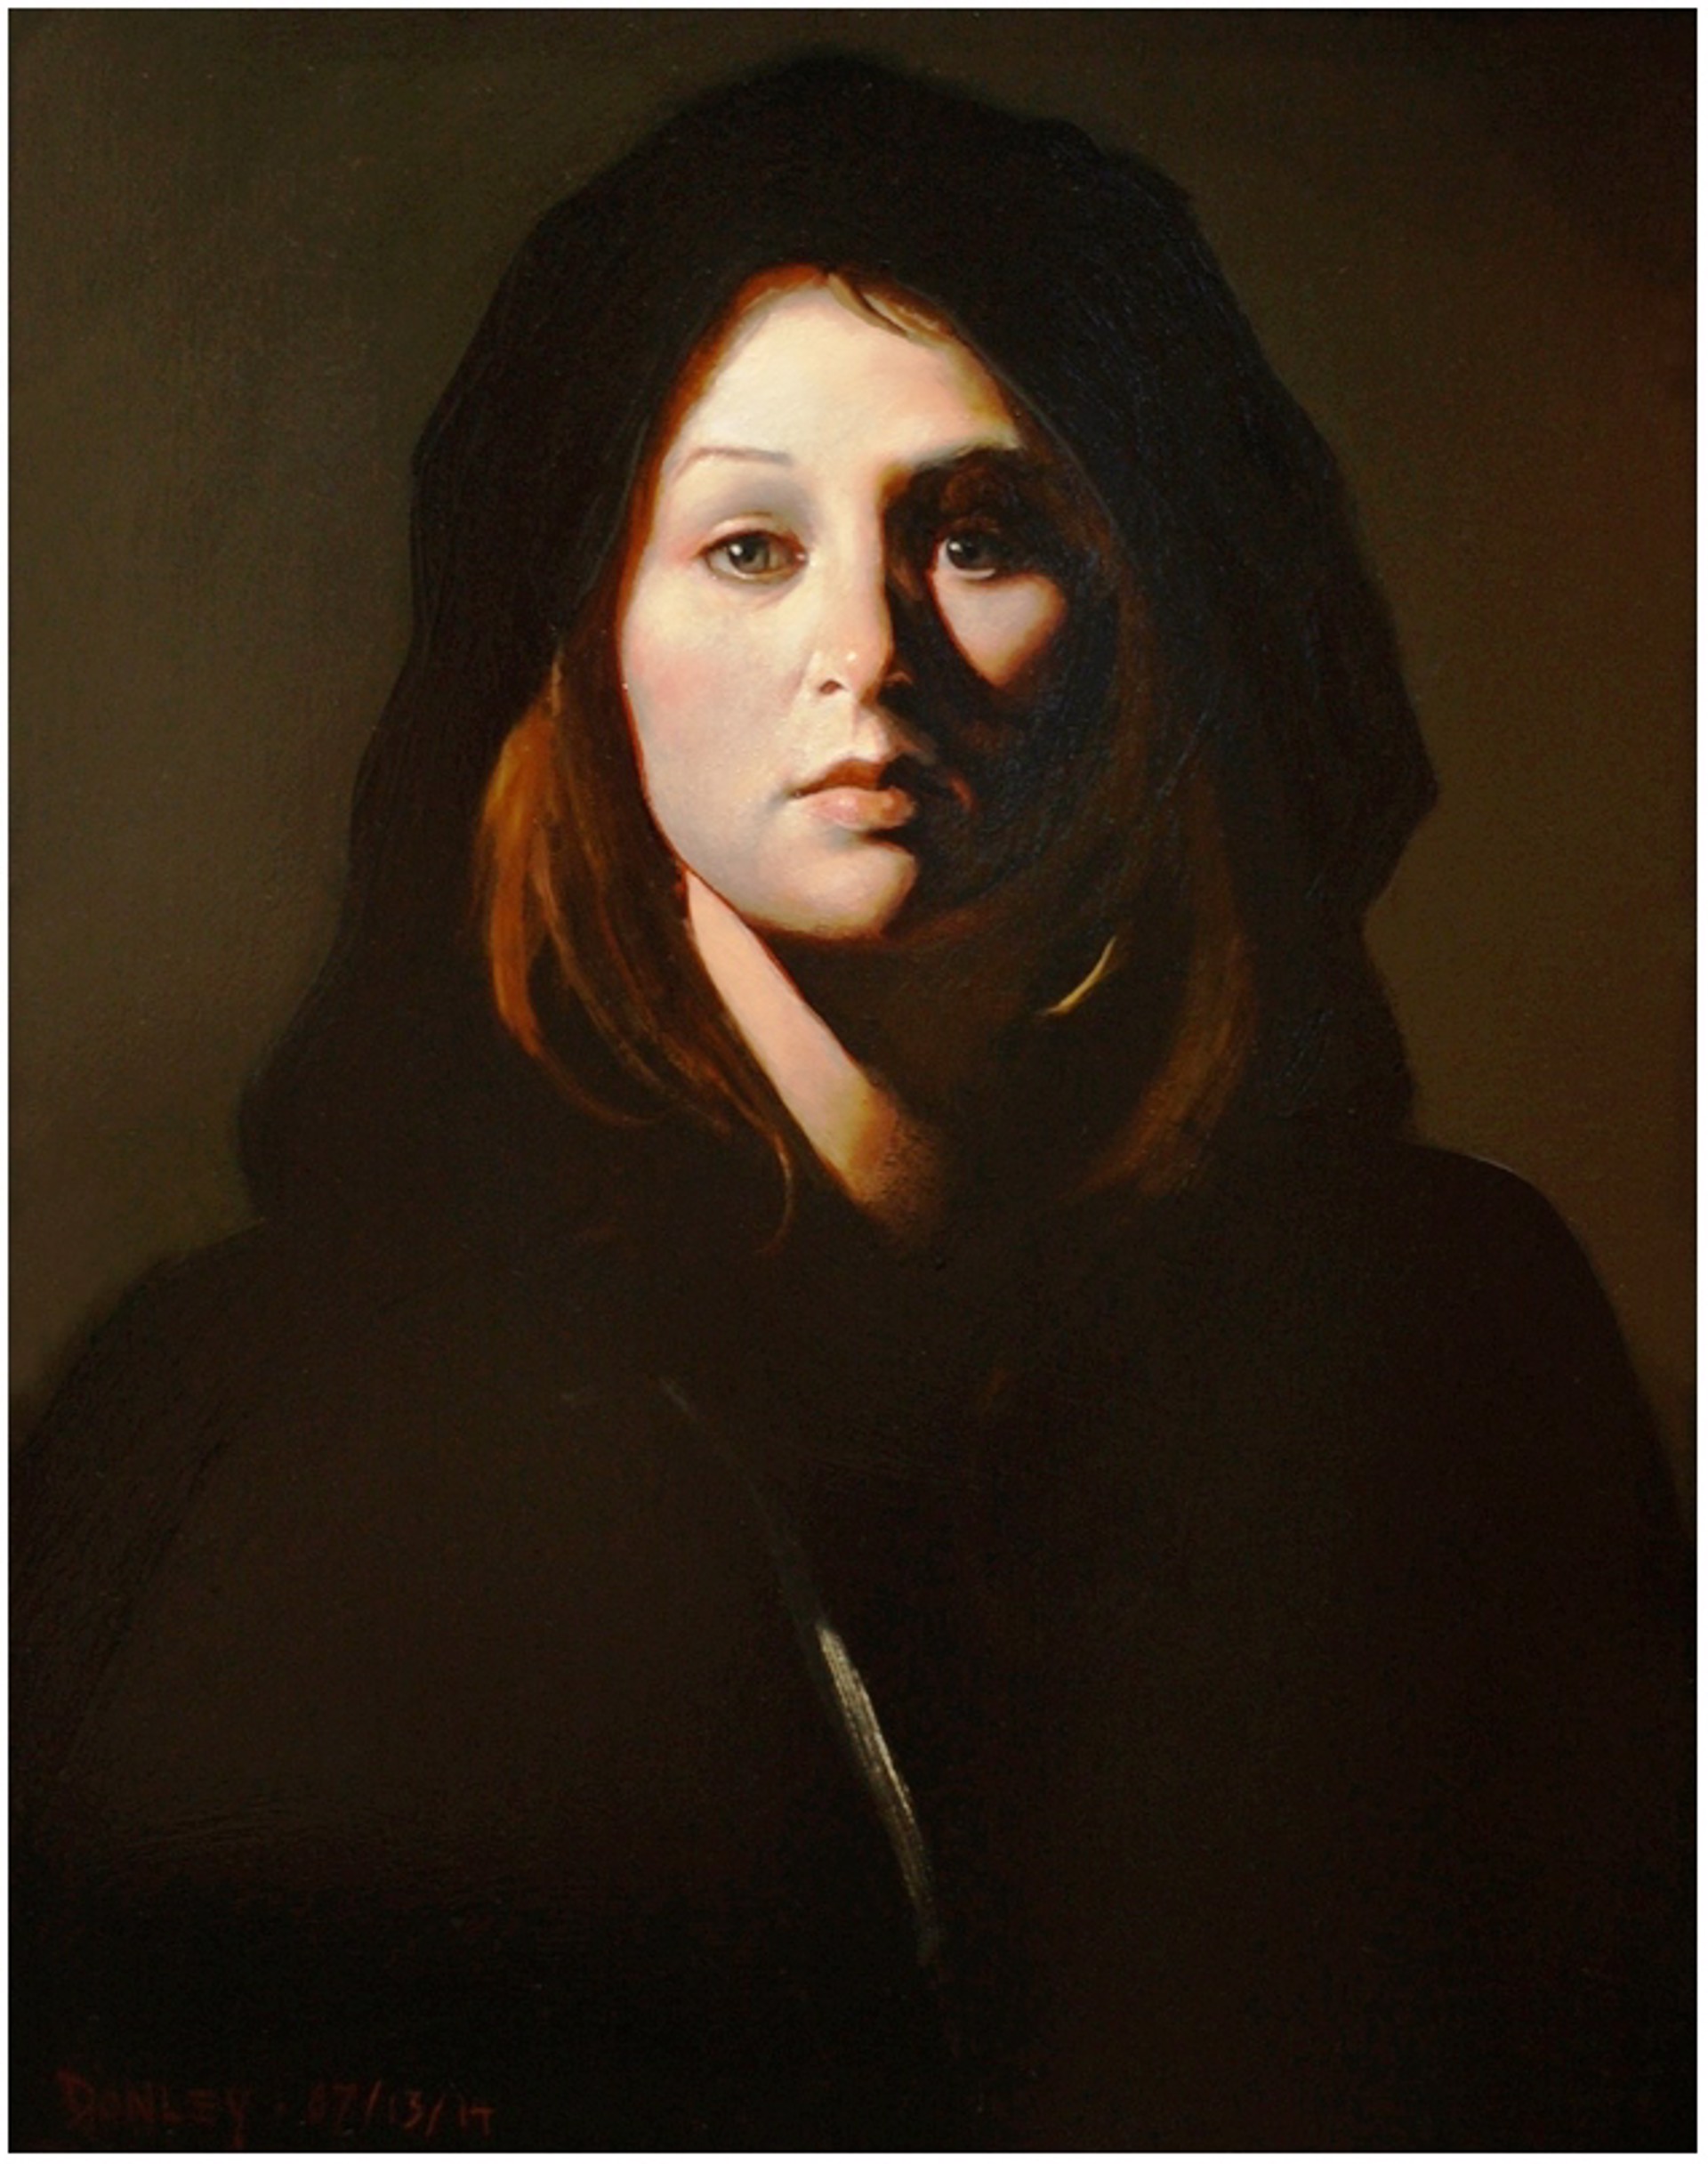 Baroque Portrait by Ray Donley